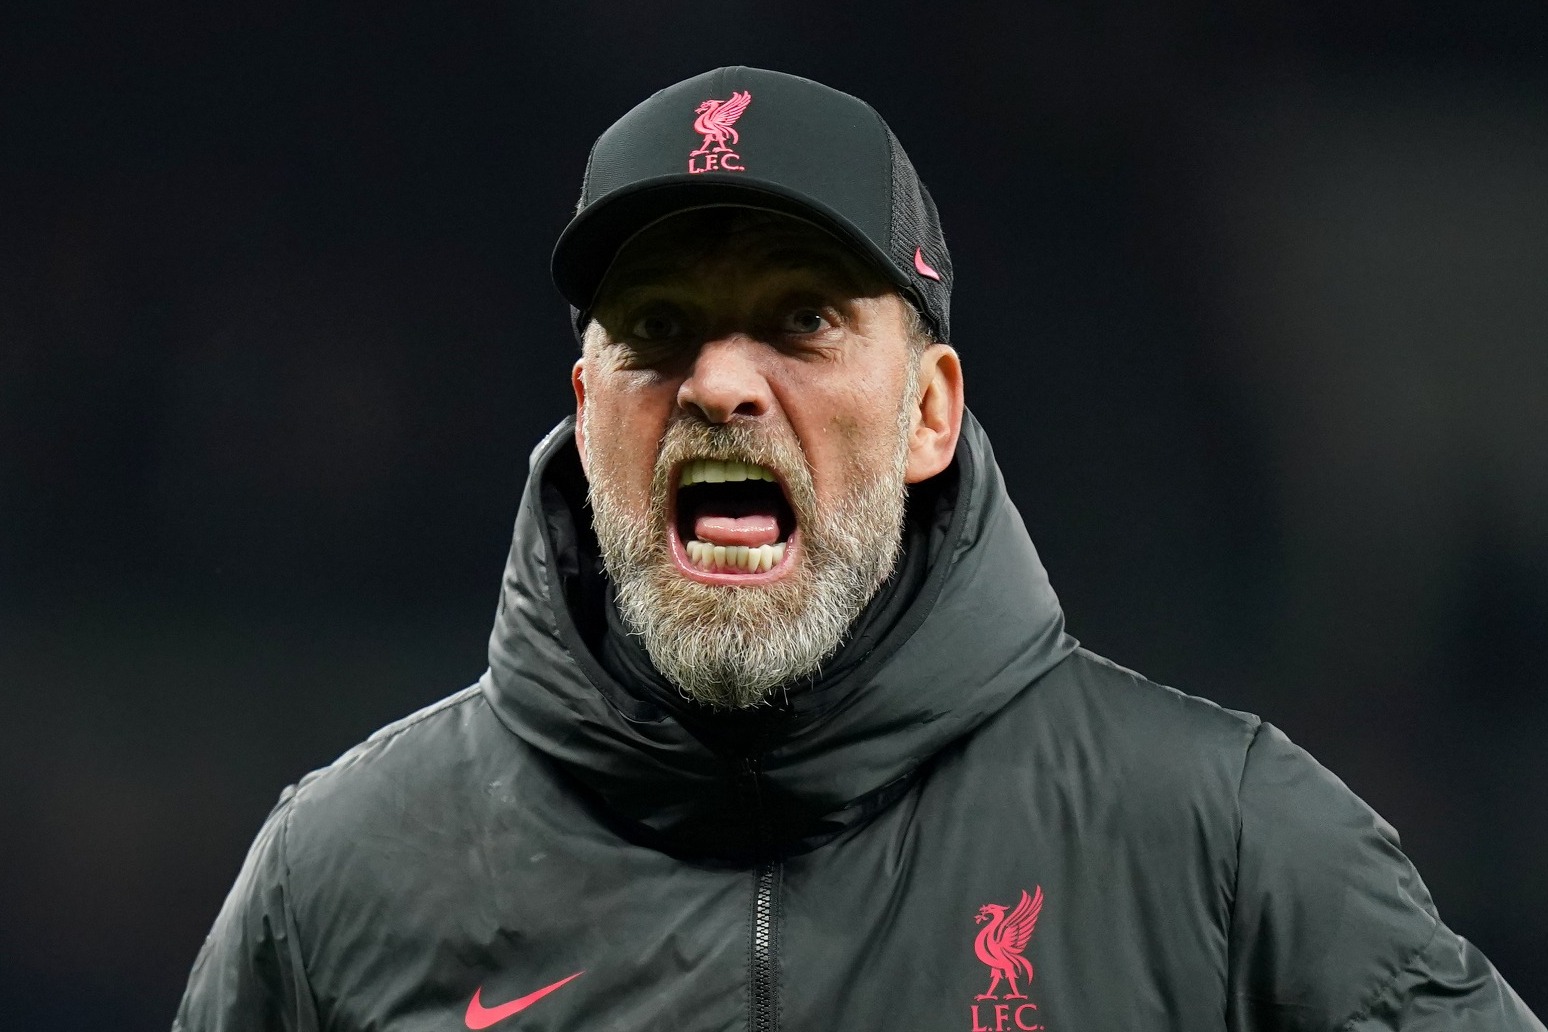 Jurgen Klopp gets touchline ban and £30,000 fine for confrontation with official 